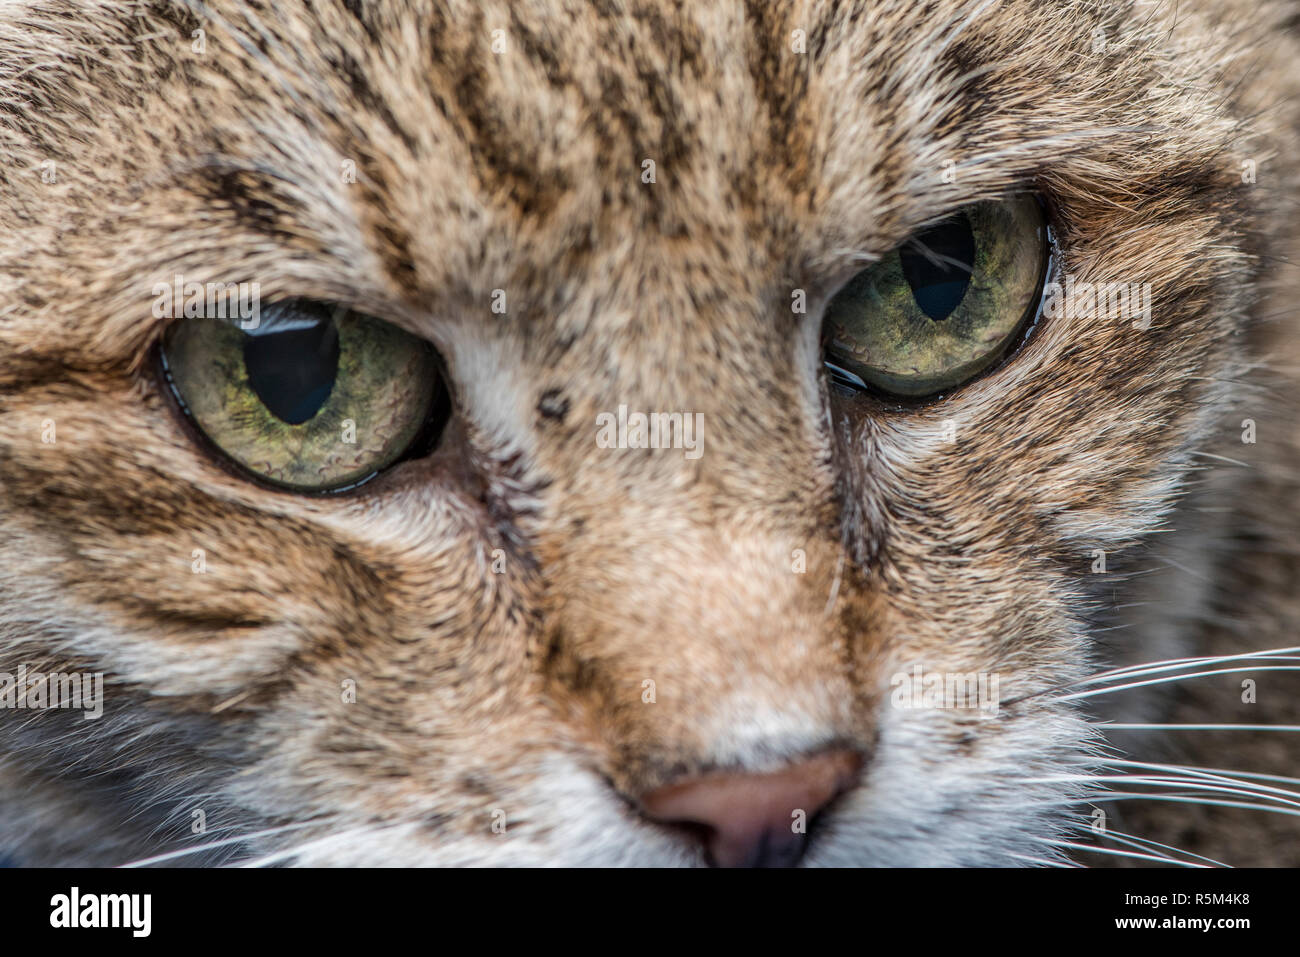 A close up photo of a ten year old foster cat's face and eyes showing the details in both. Stock Photo